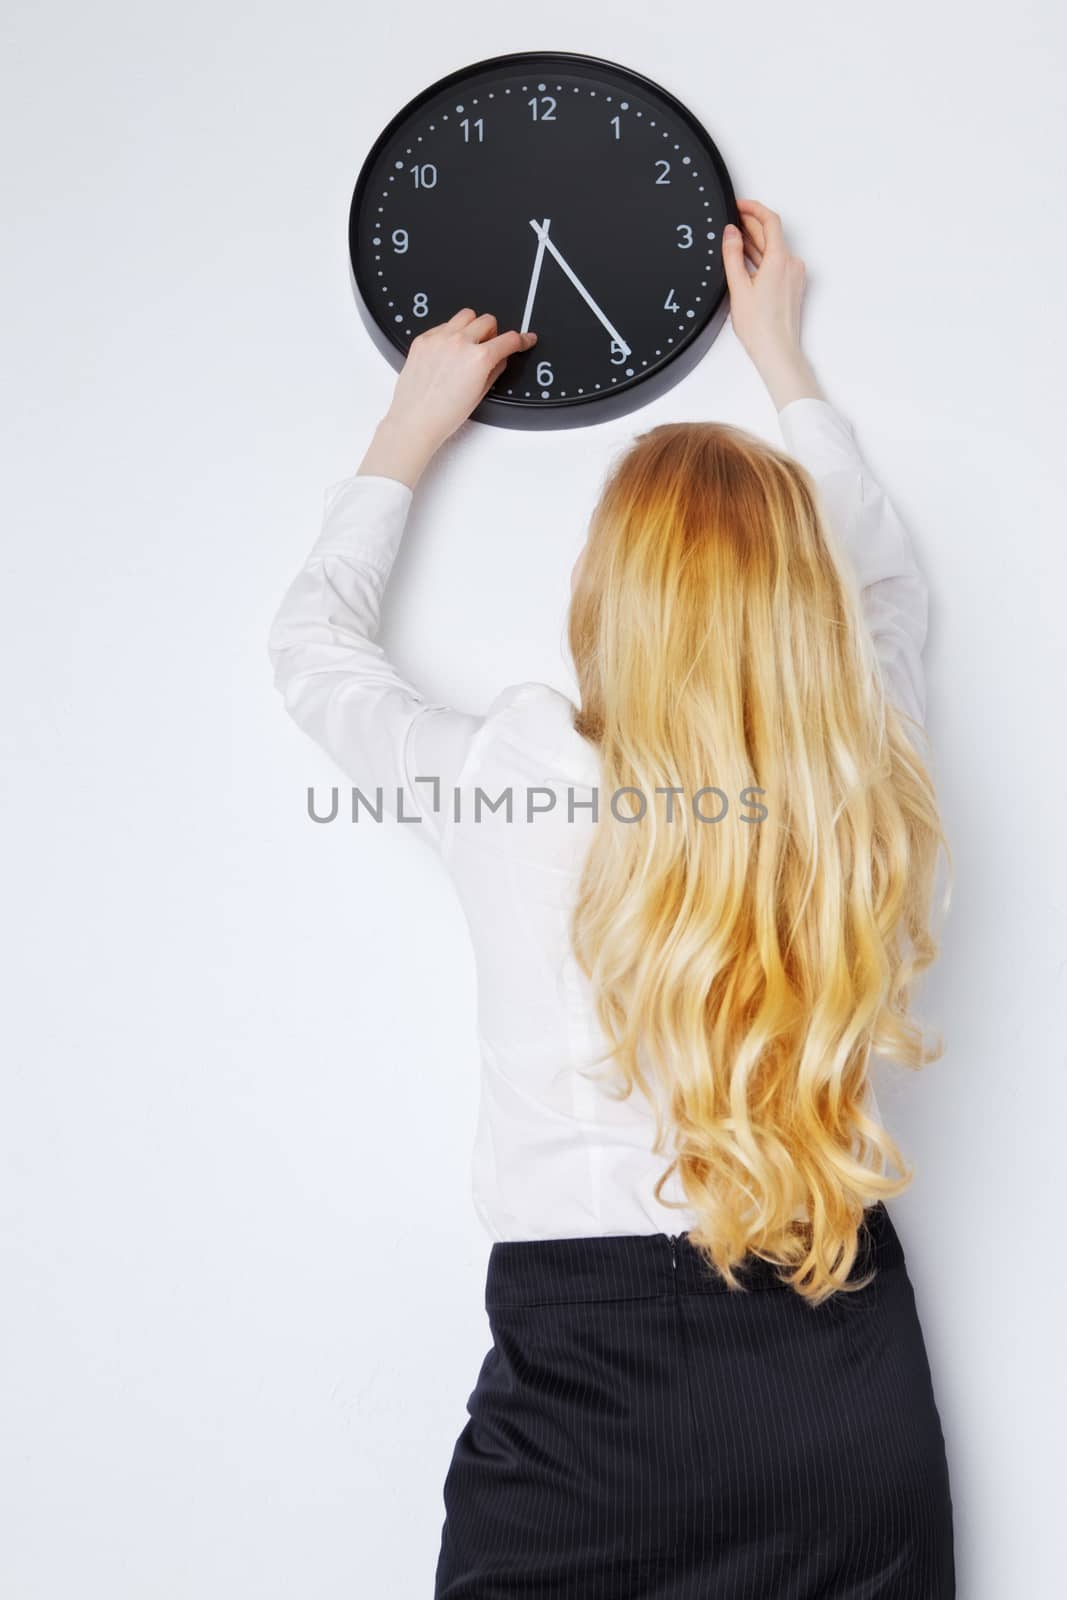 Office Girl Sets the Clock by petr_malyshev